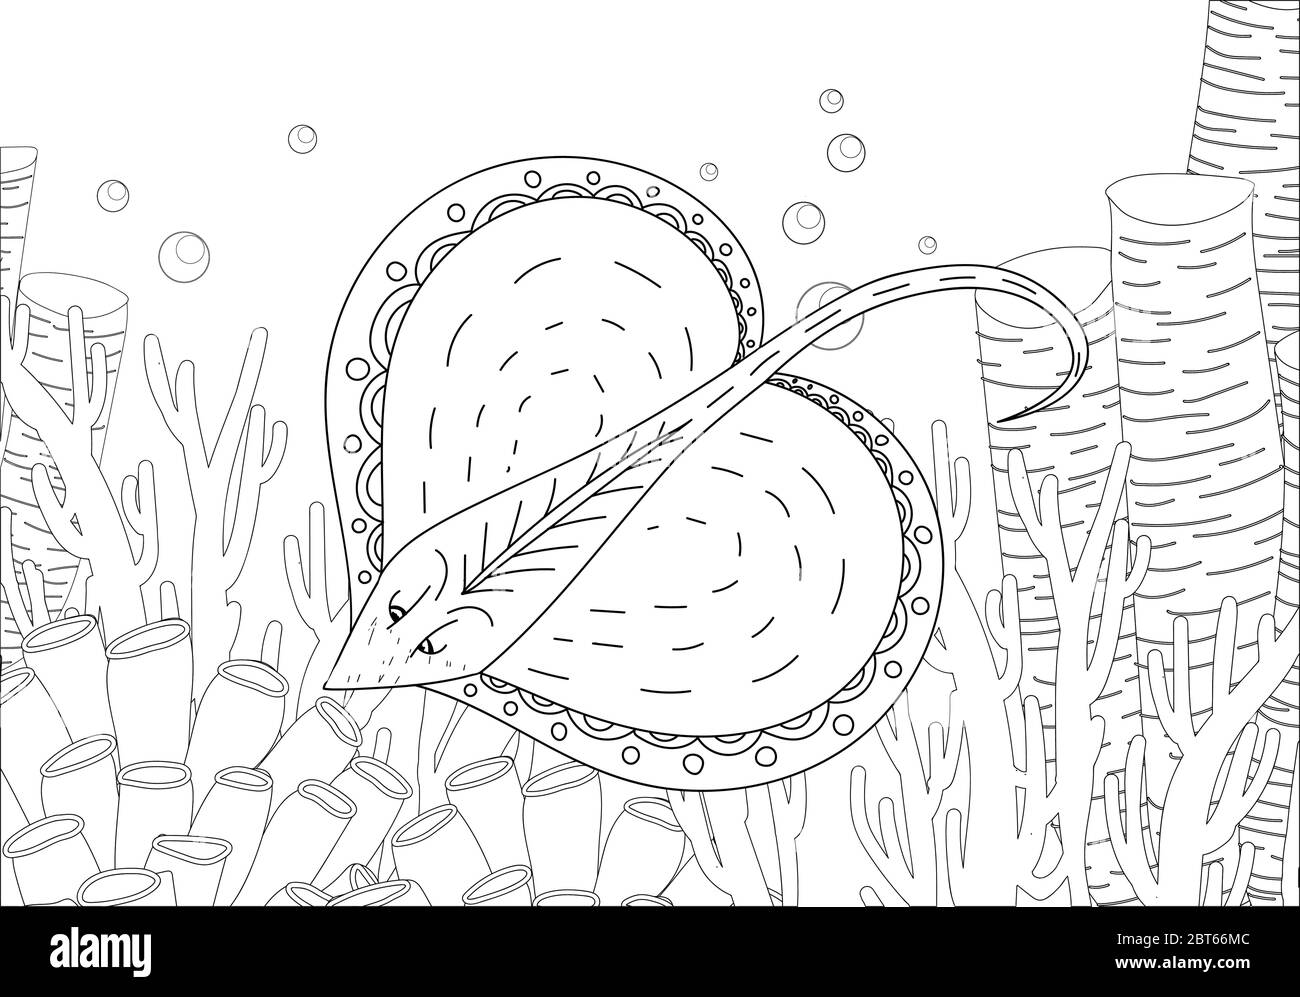 Staining. Coloring book. Coloring book with a picture of a mantle stingray in zentangle style. Antistress freehand sketch drawing. Vector illustration Stock Vector